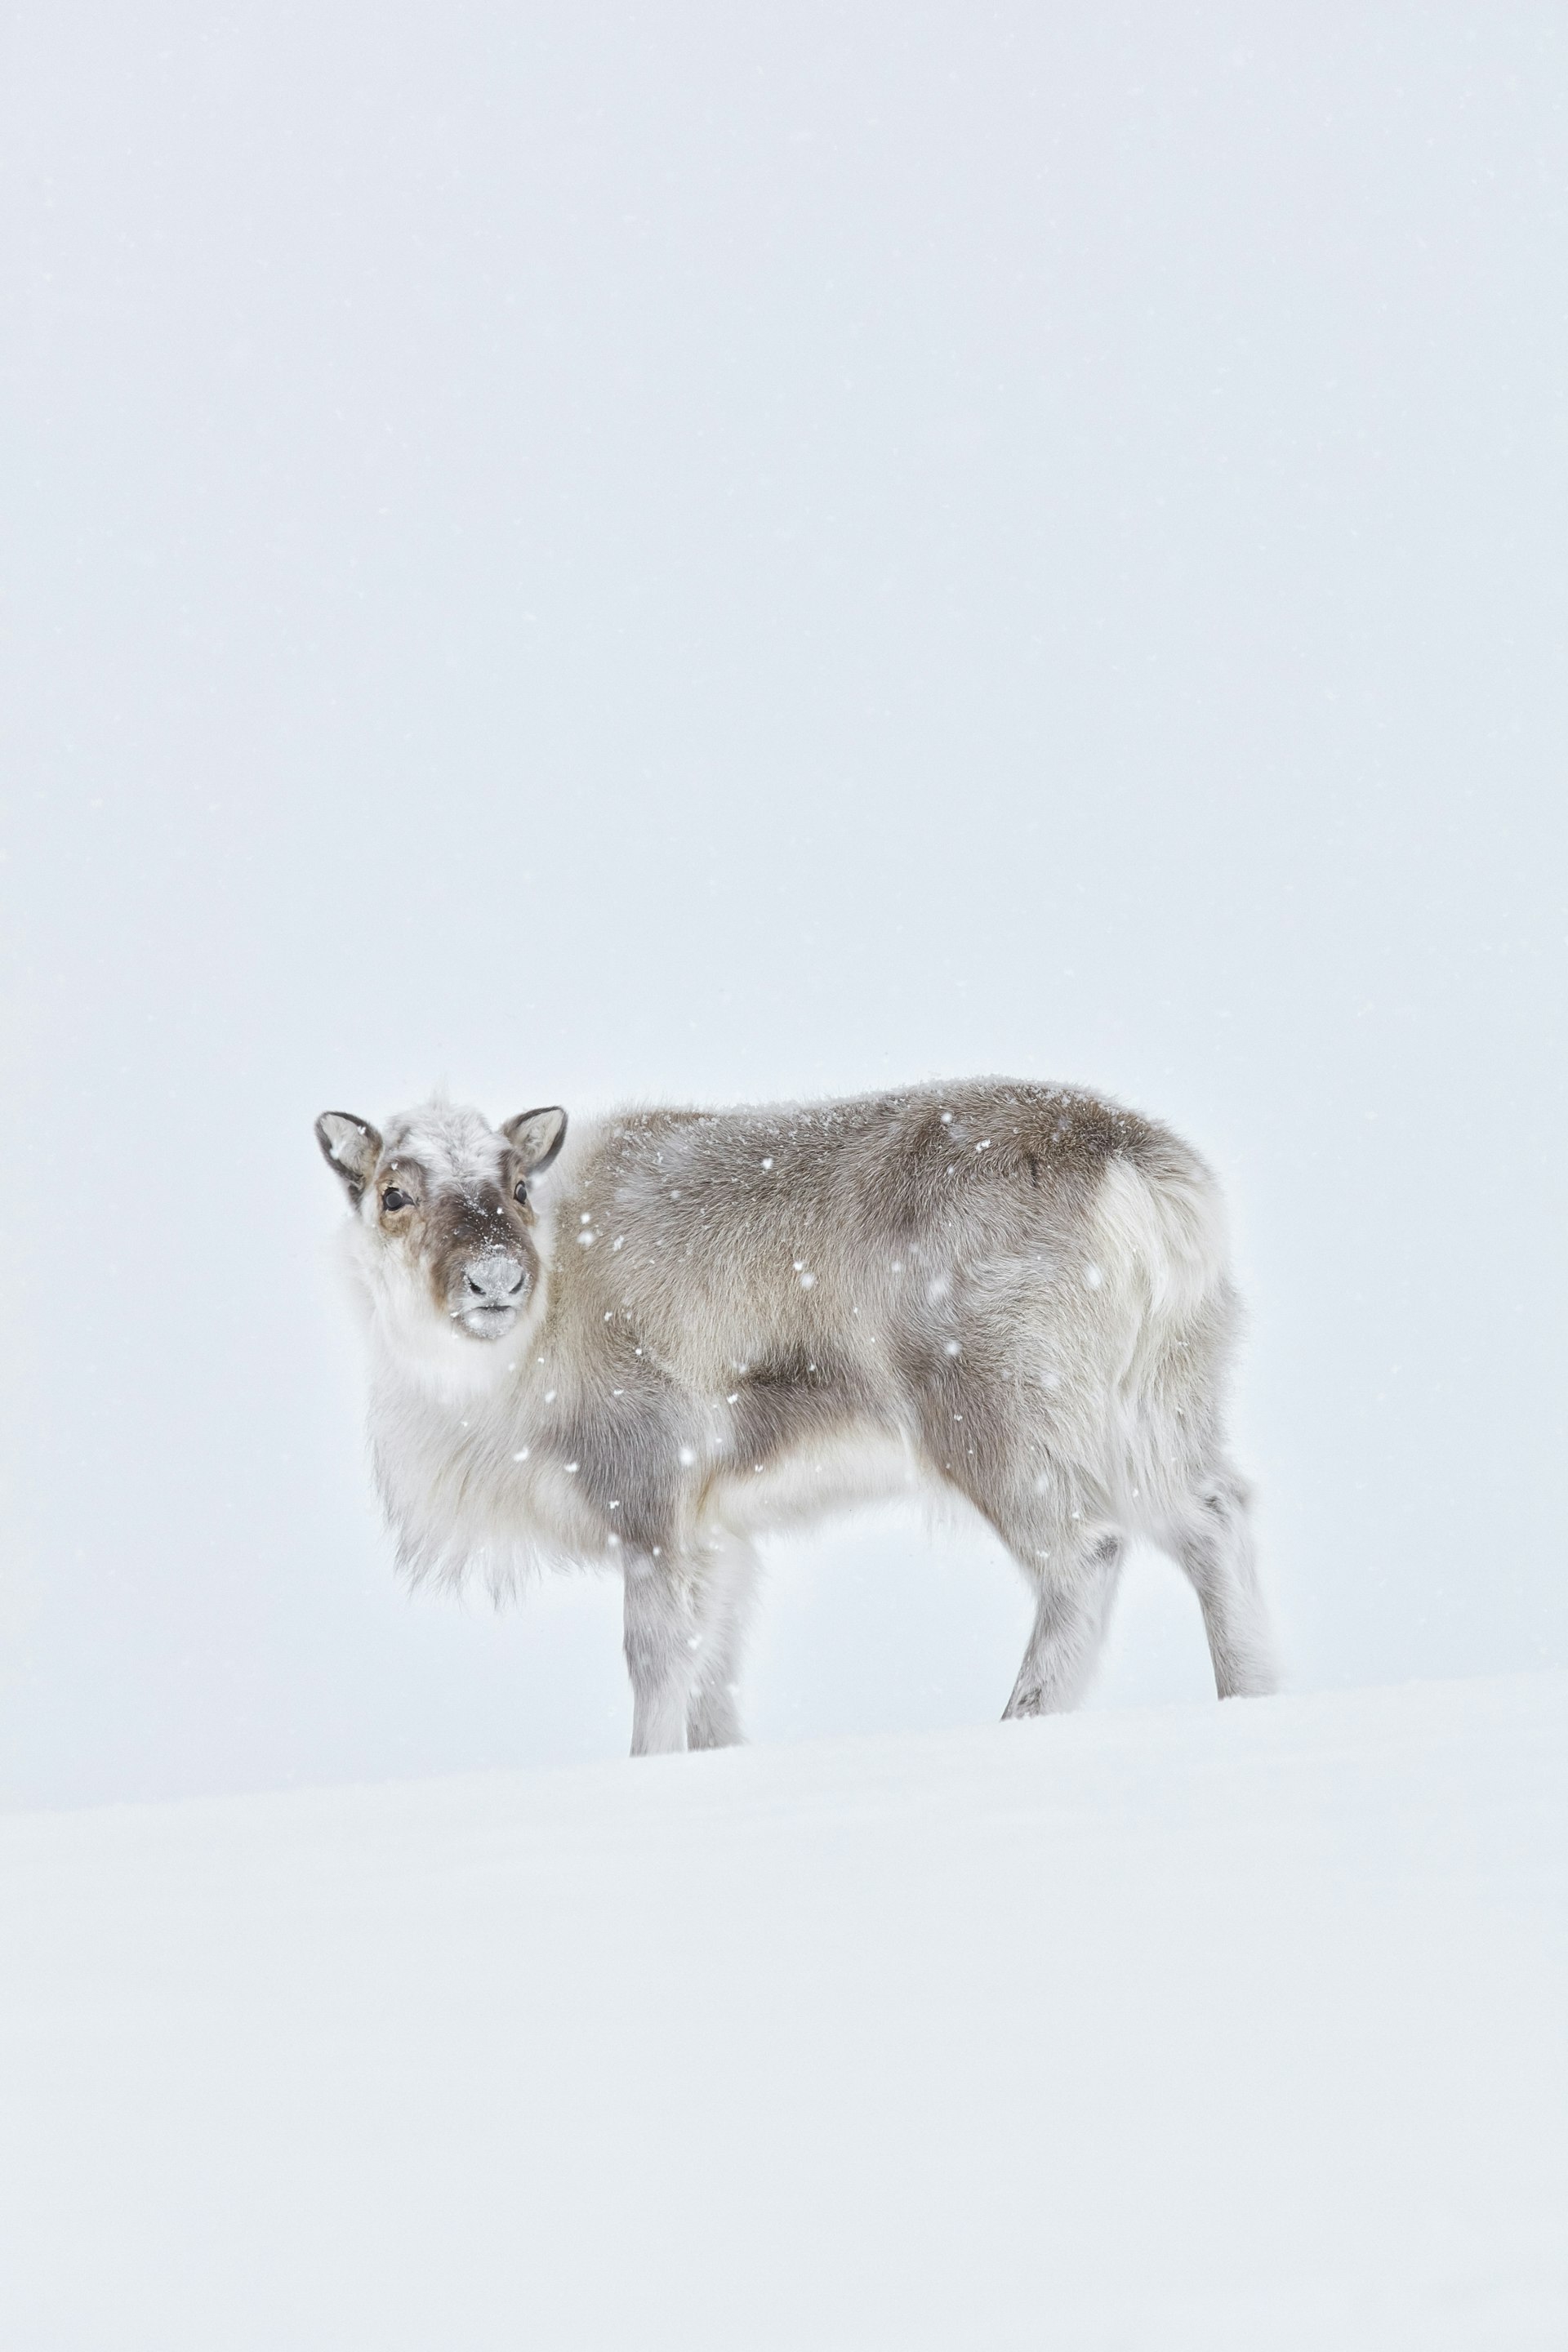 A reindeer standing alone in the snow